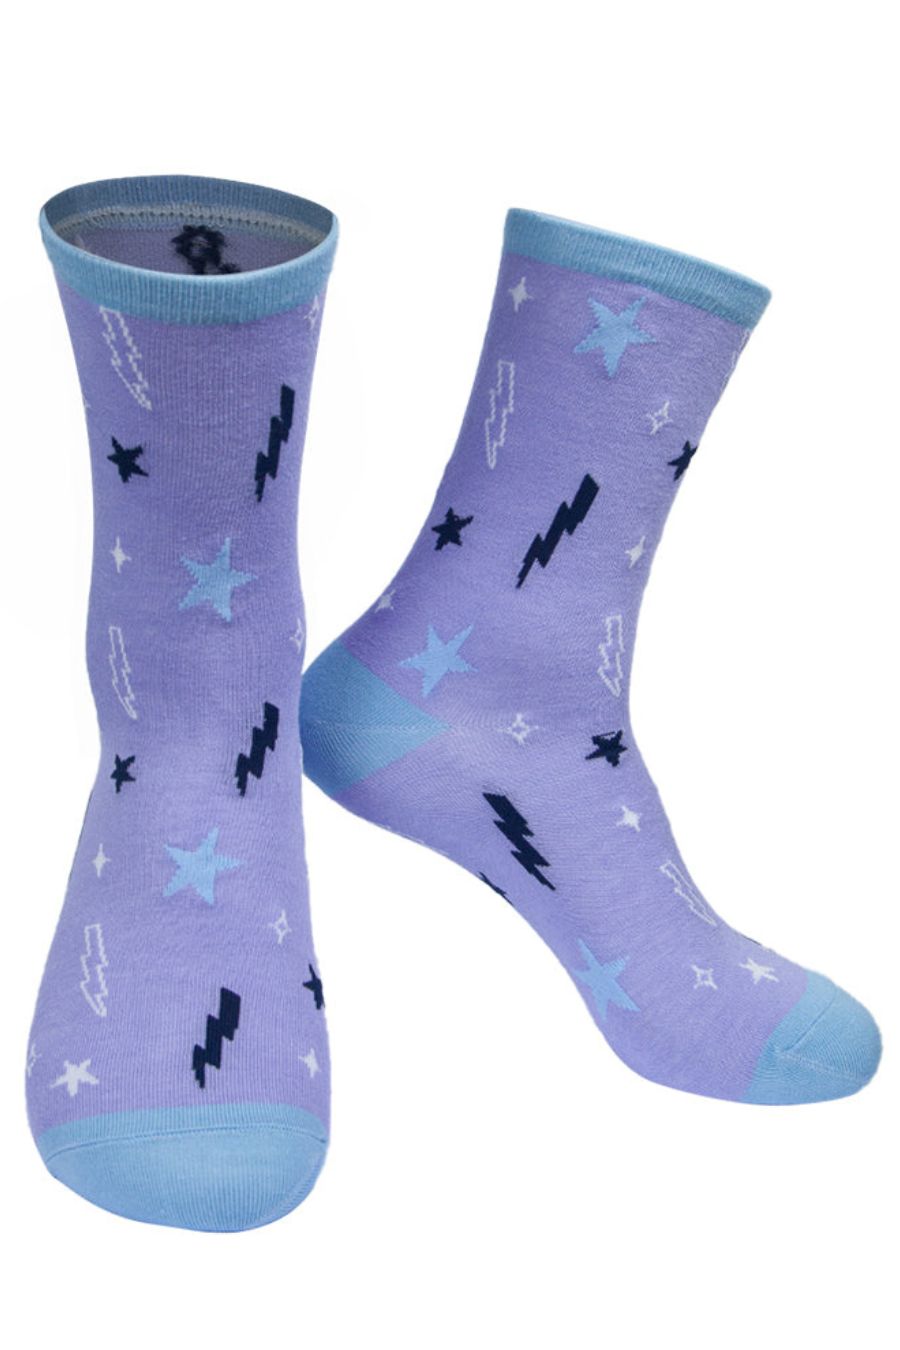 lilac ankle socks with an all over lightning bolt and star pattern